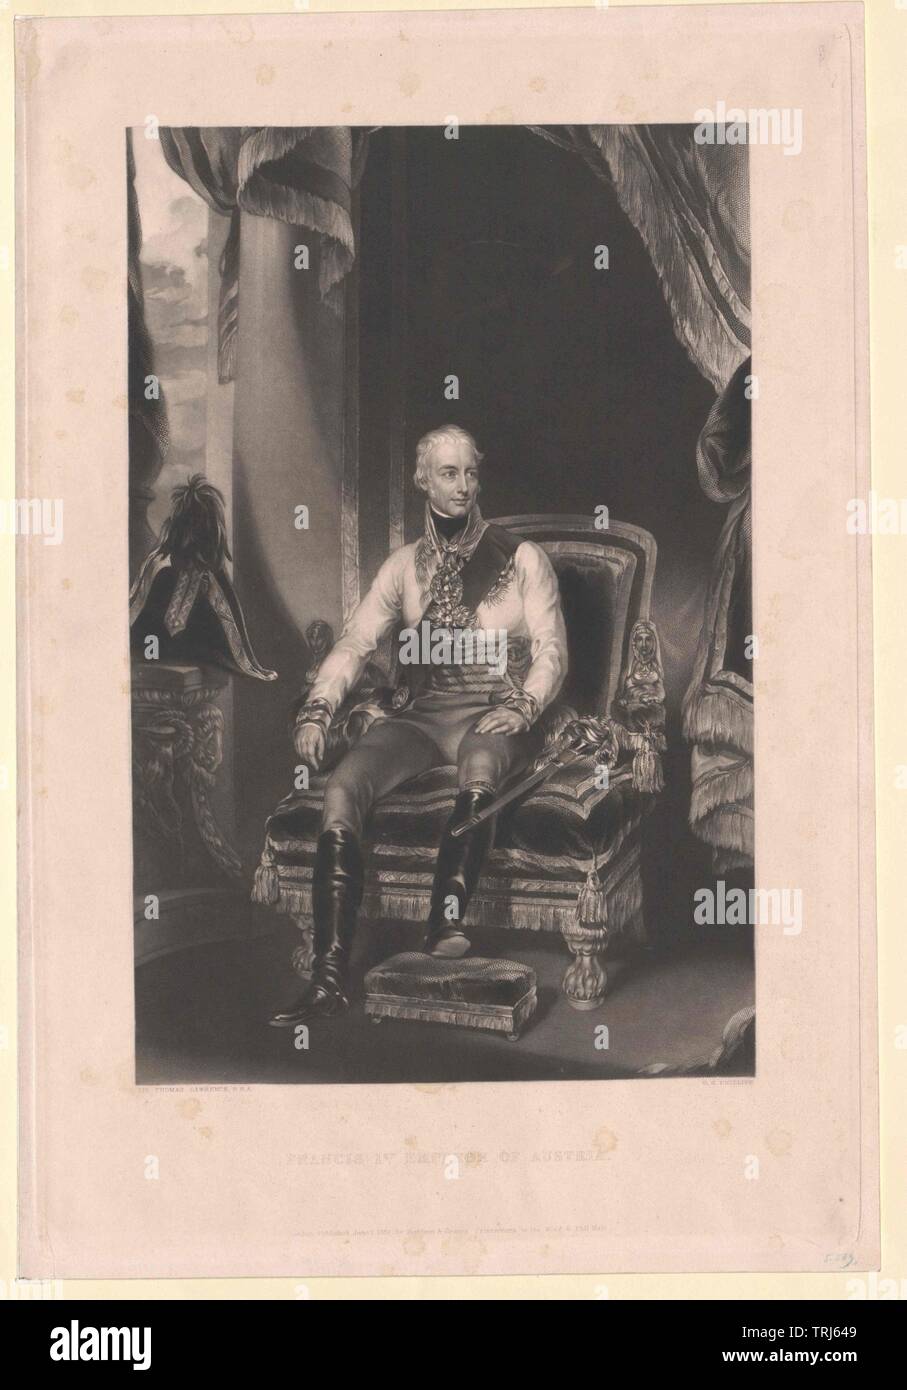 Francesco II, Imperatore del Sacro Romano Impero, Additional-Rights-Clearance-Info-Not-Available Foto Stock